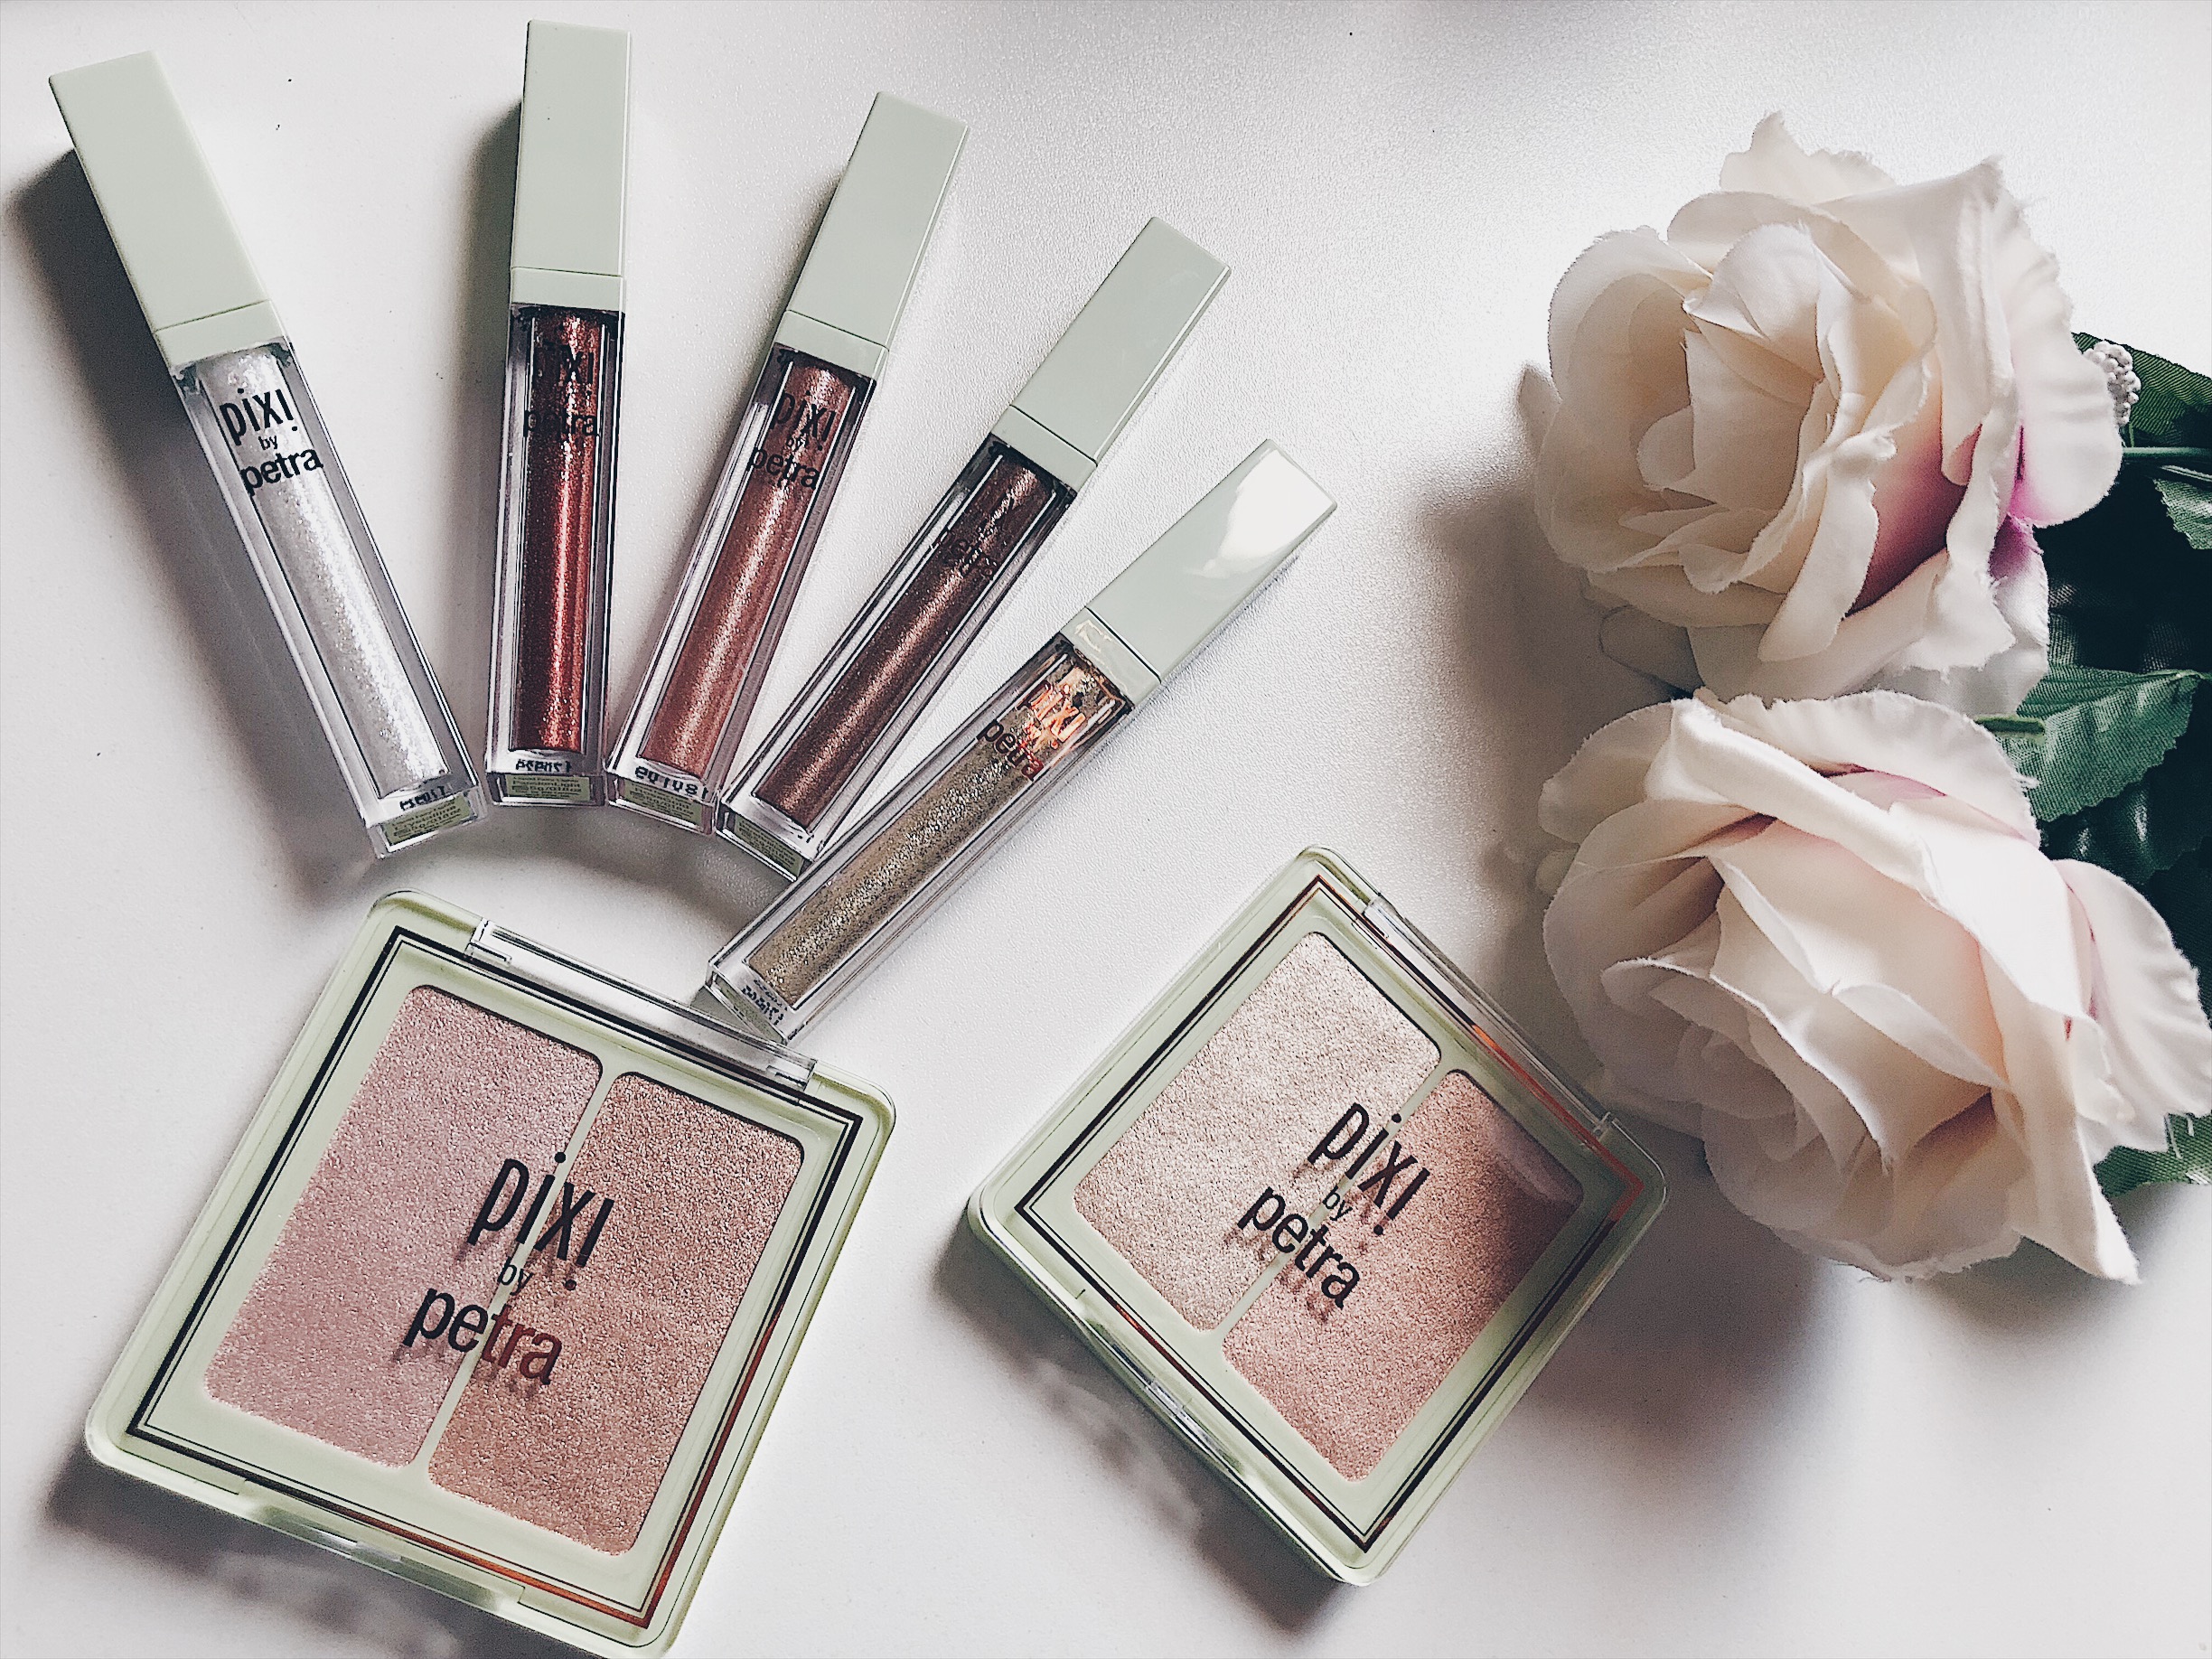 Glow in a box by pixi beauty, get them gorgeous with Petra!